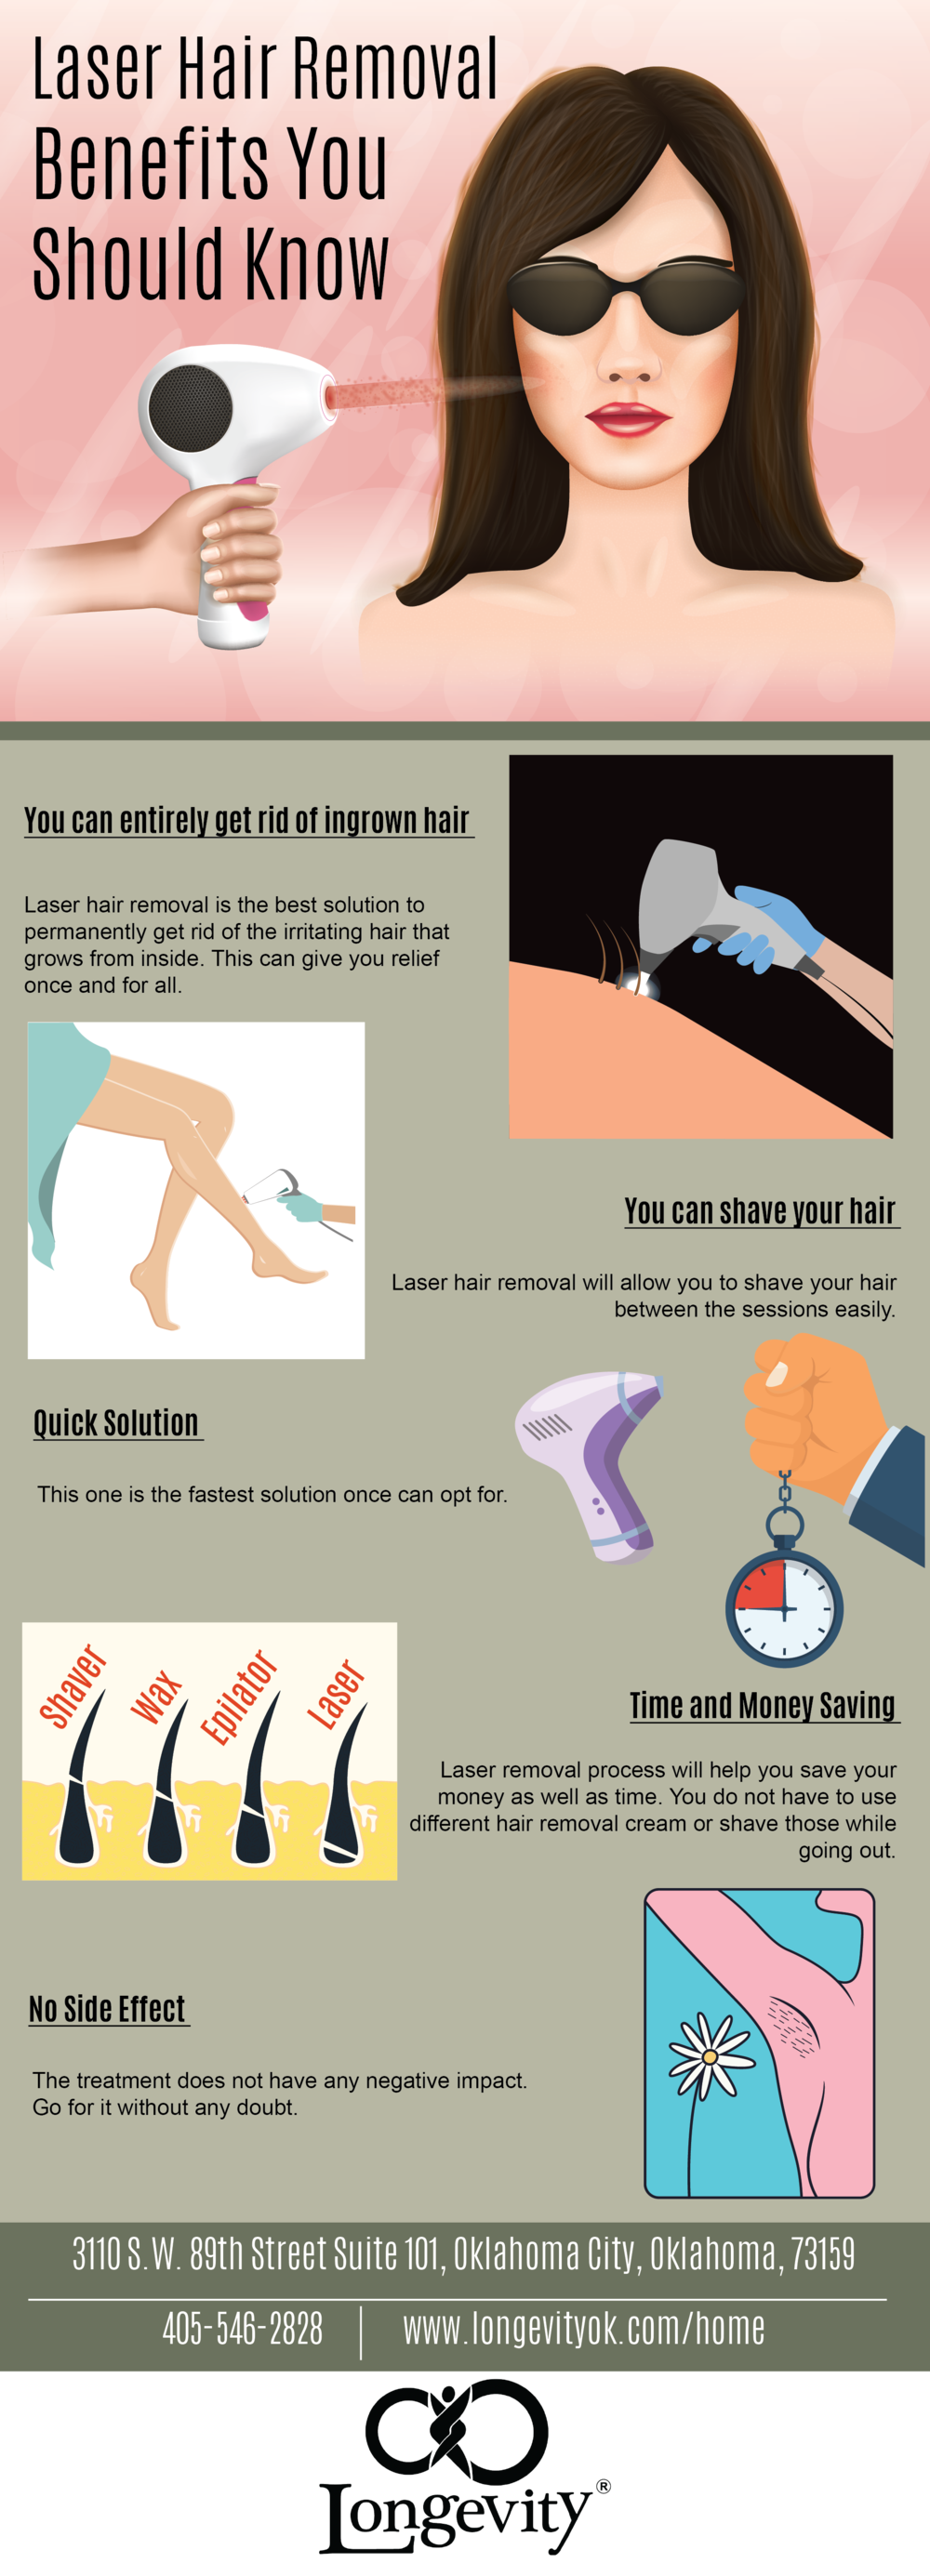 Laser Hair Removal Benefits You Should Know